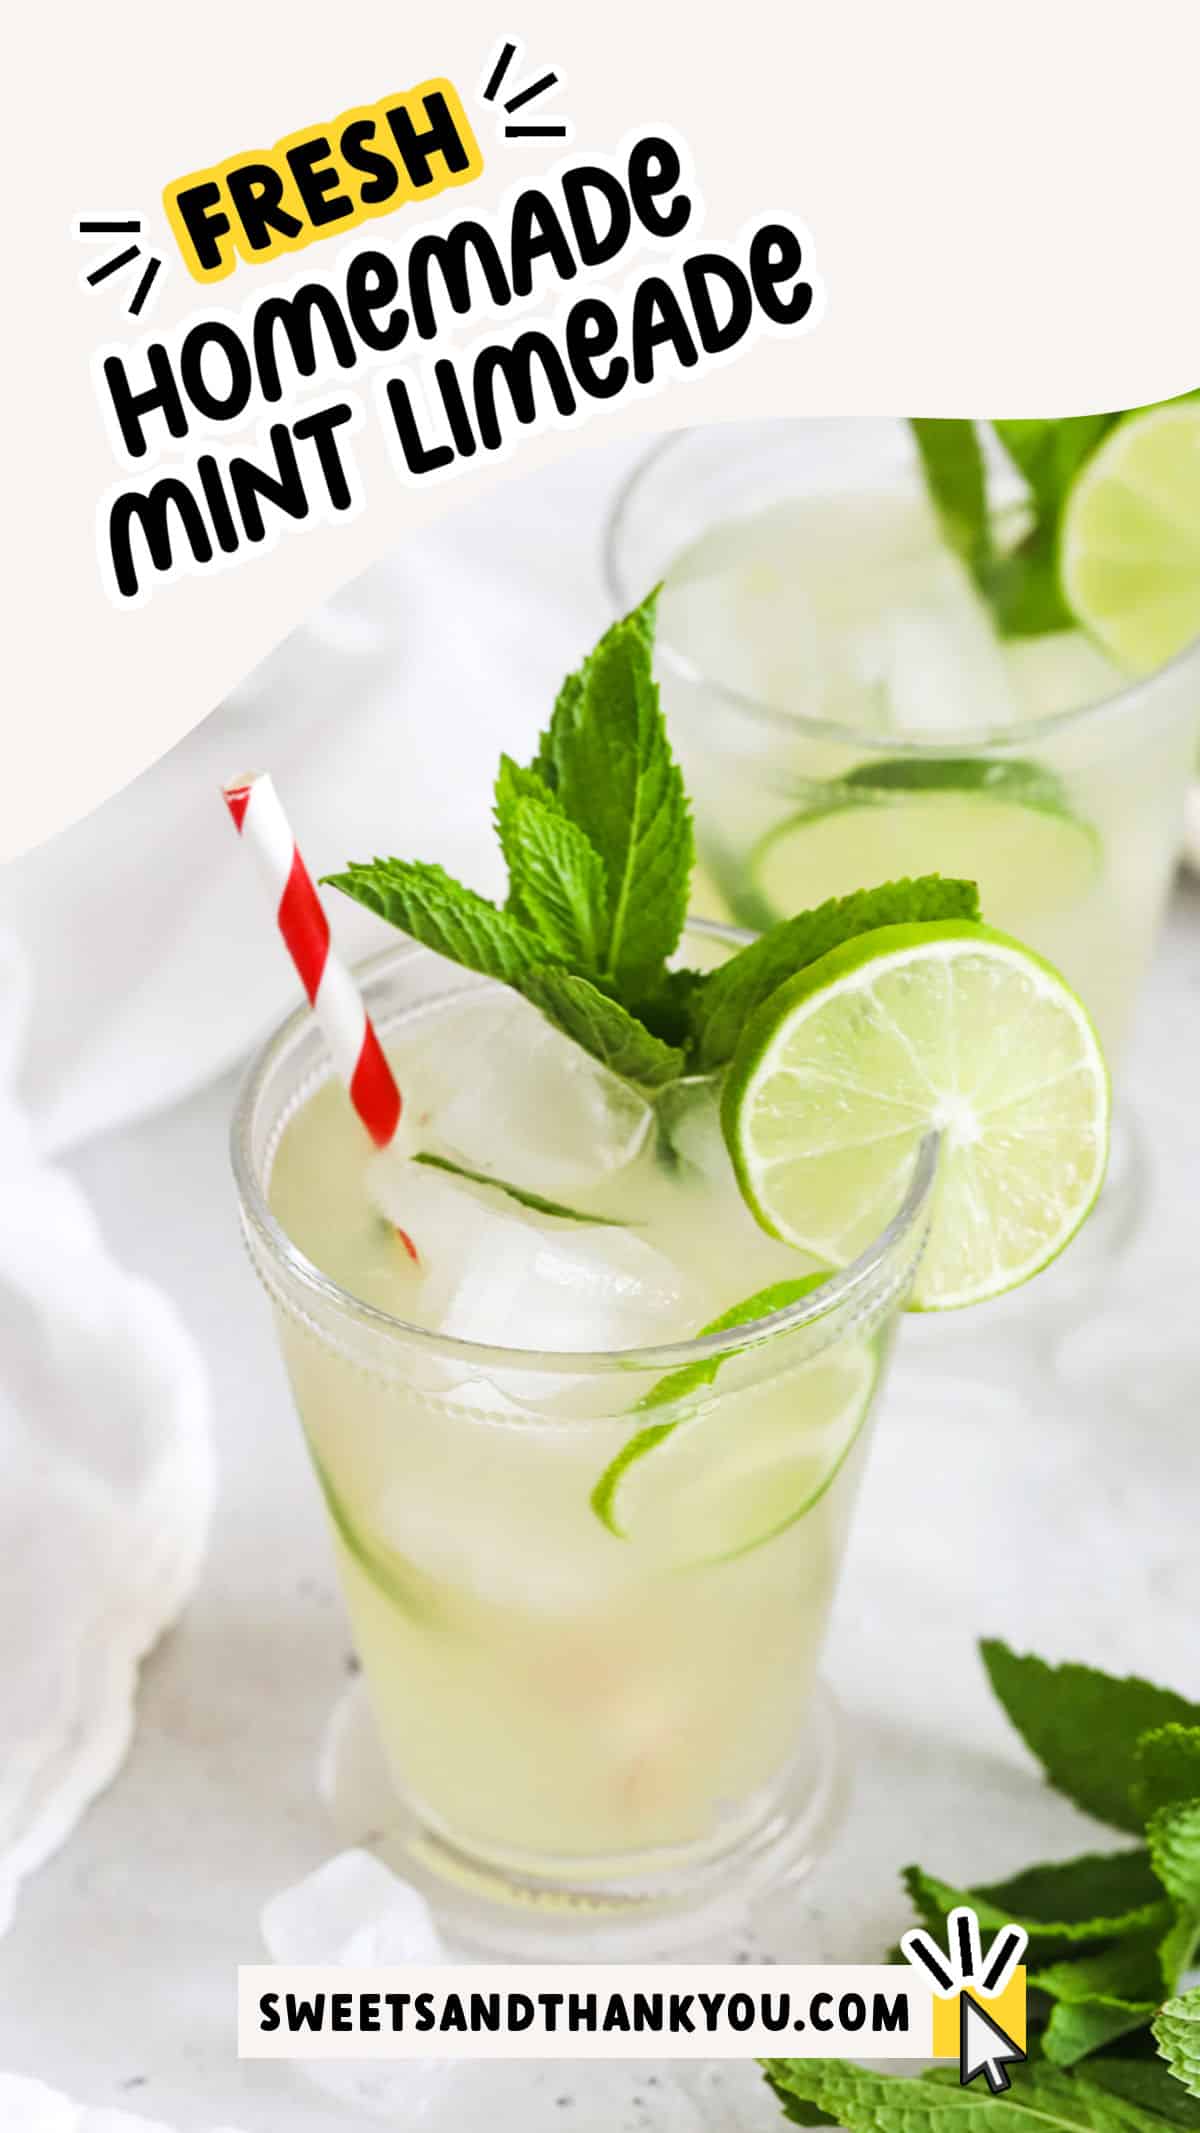 Let's make Mint Limeade AKA Virgin Mojitos! This homemade limeade recipe is kissed with fresh mint & tastes amazing. It's the perfect non-alcoholic drink for a celebration! (like drinking a virgin mojito!)